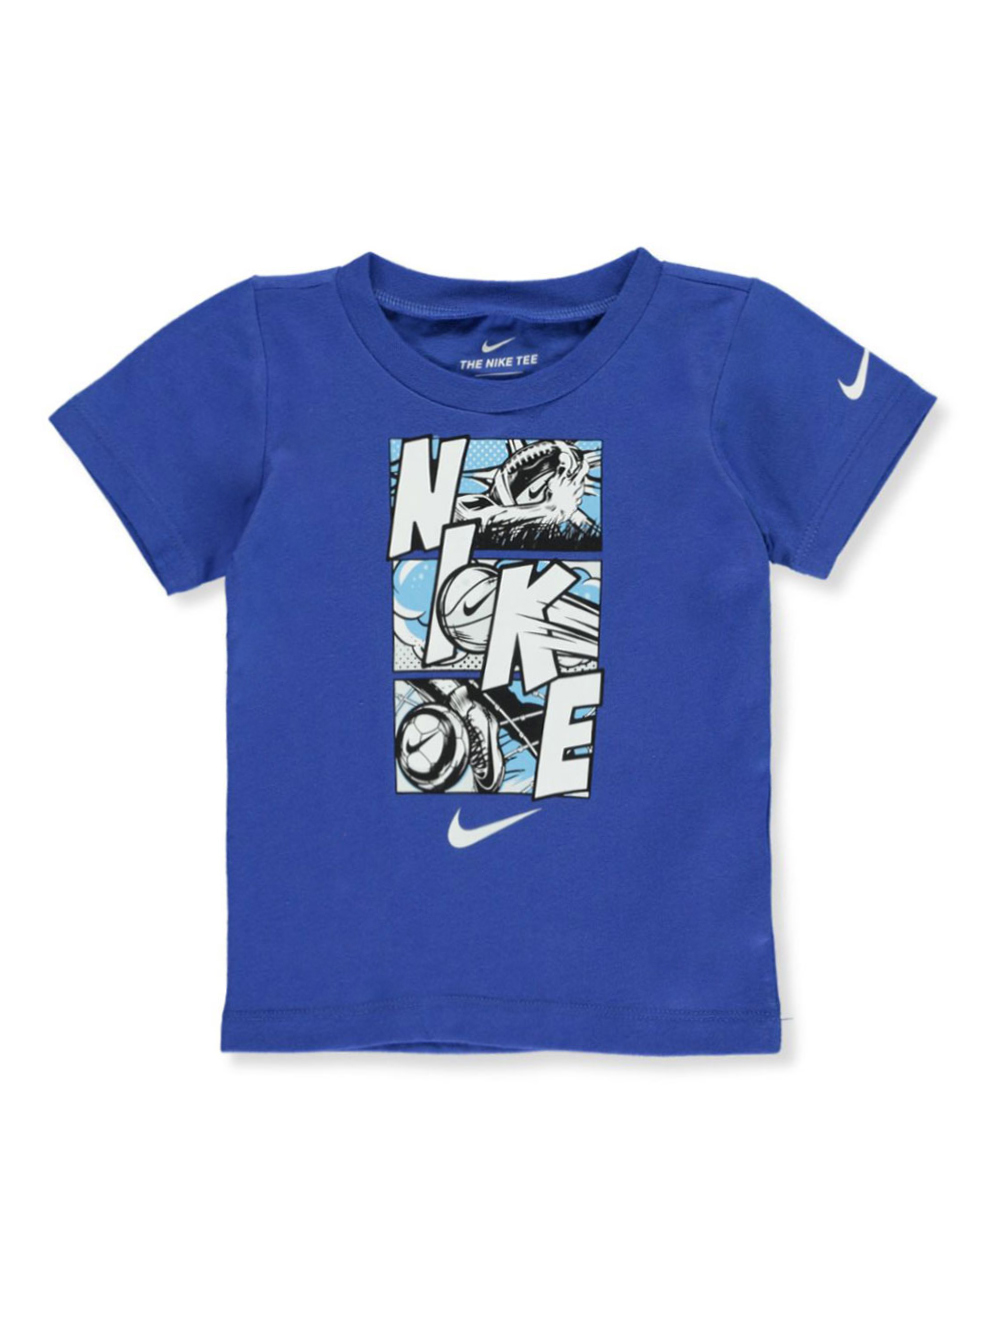 nike t shirt for baby boy